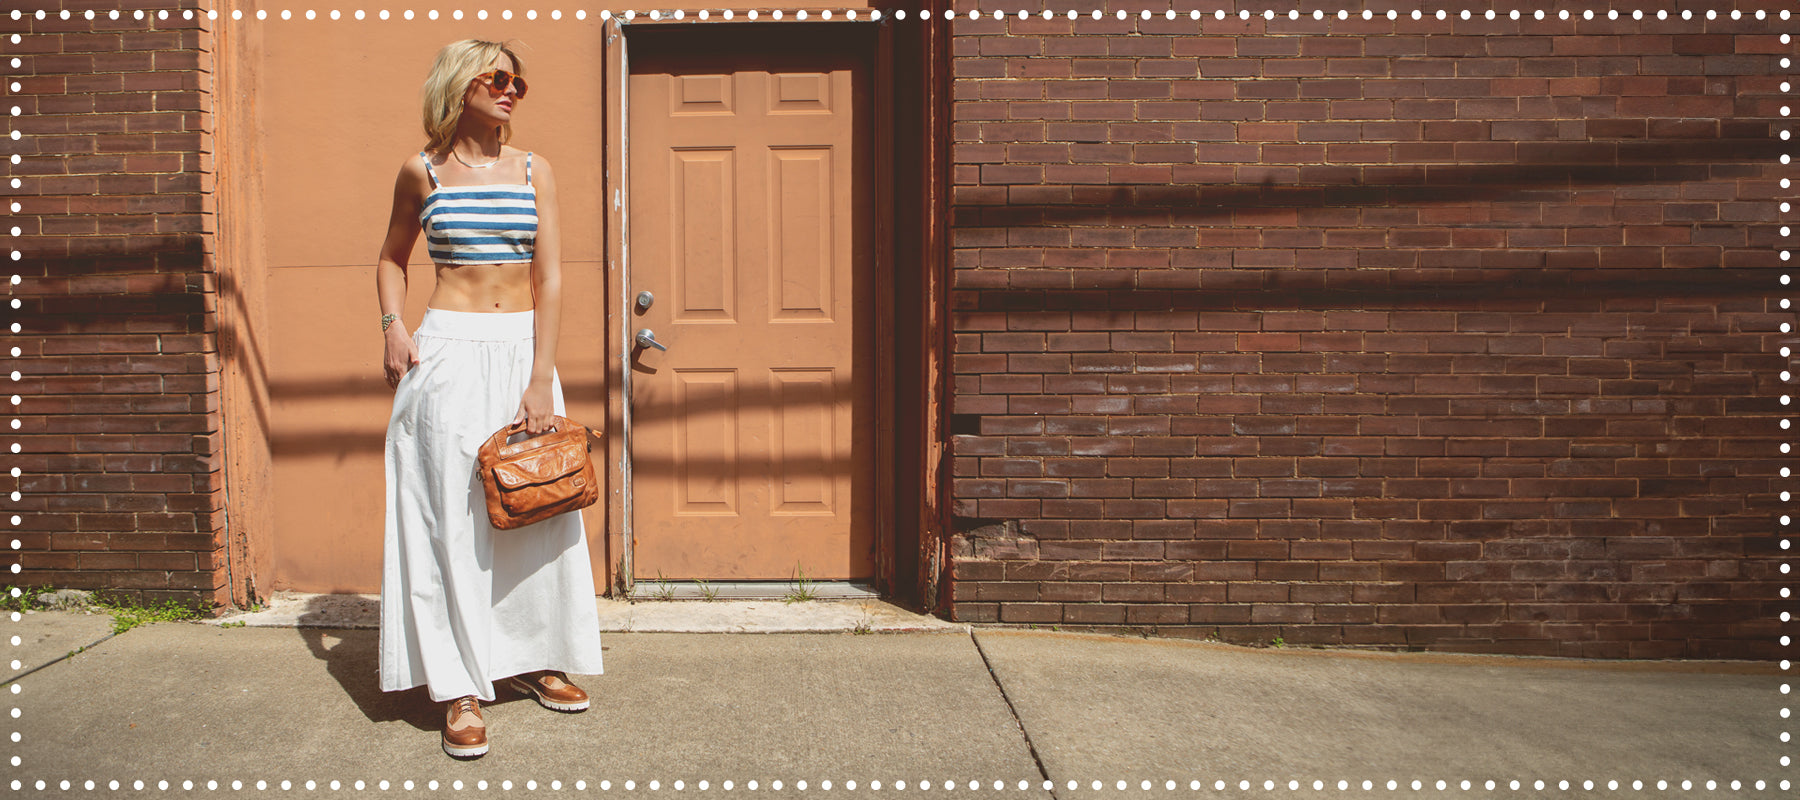 Woman in a striped top and white pants standing beside a red brick wall and a brown door, holding a brown bag and wearing sunglasses.